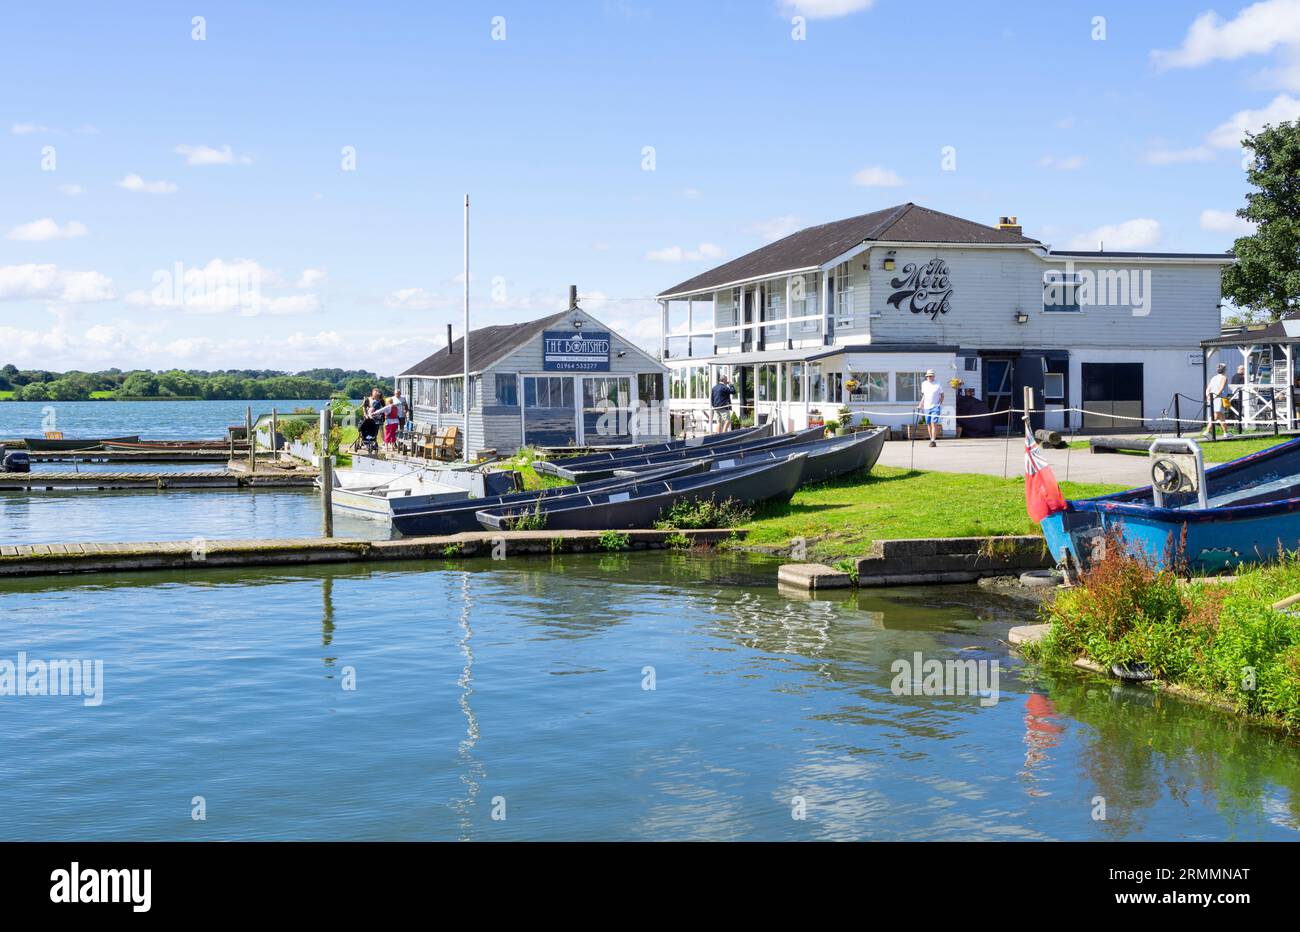 Hornsea Mere Café and Boats for hire Hornsea East Riding of Yorkshire England UK GB Europe Stock Photo